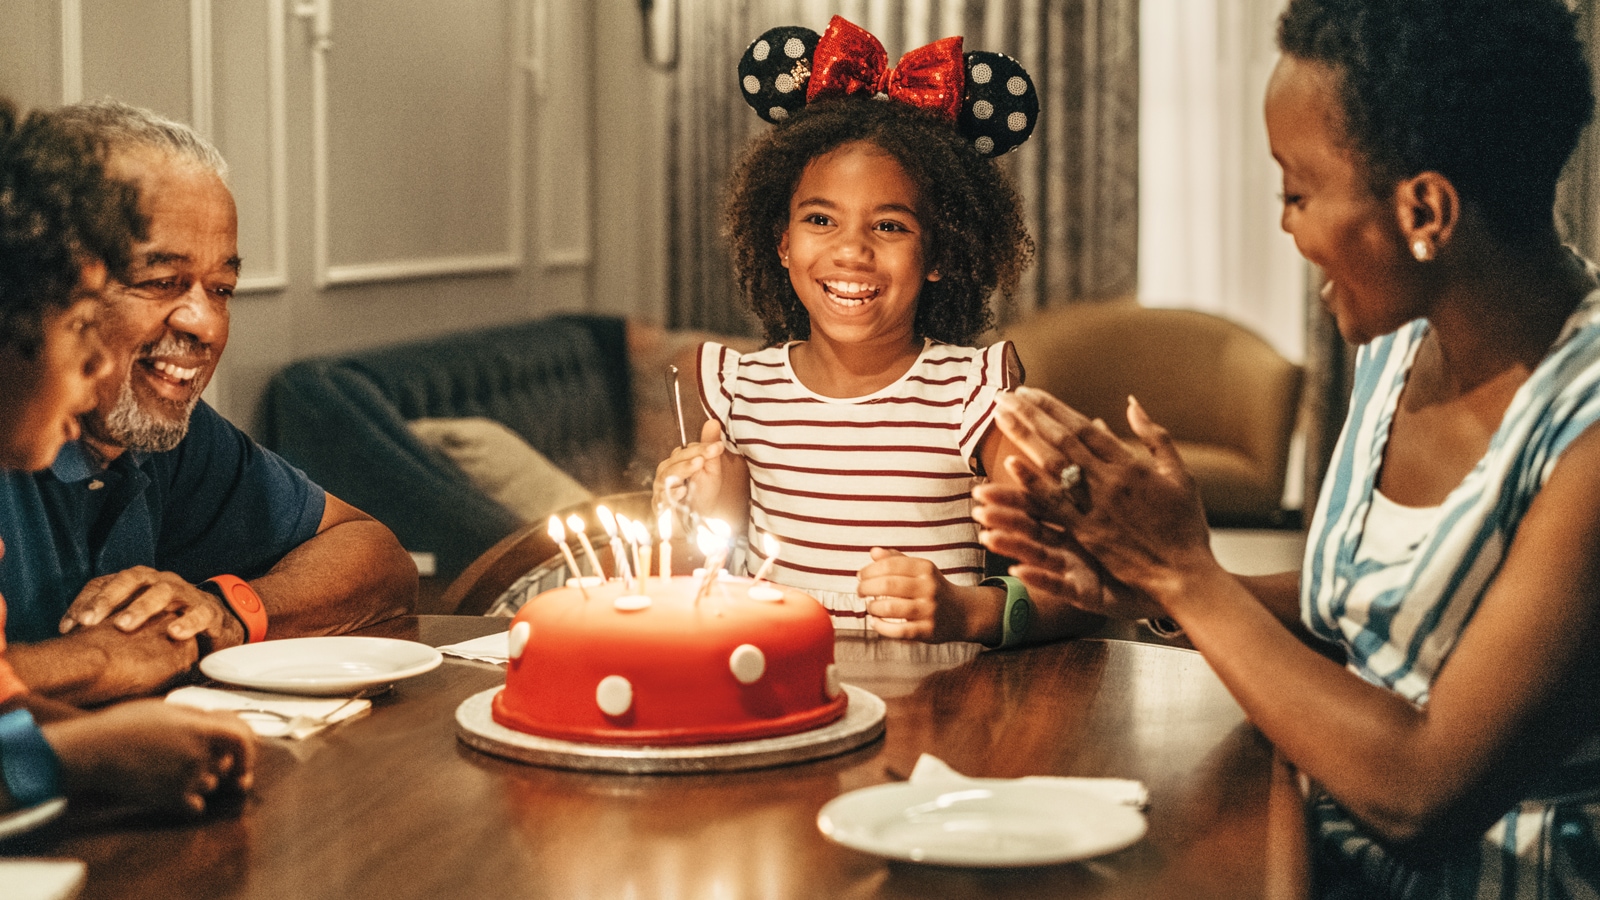 A birthday cake with lit candles on a table in front of a girl wearing a Minnie Mouse ear hat, surrounded by family 